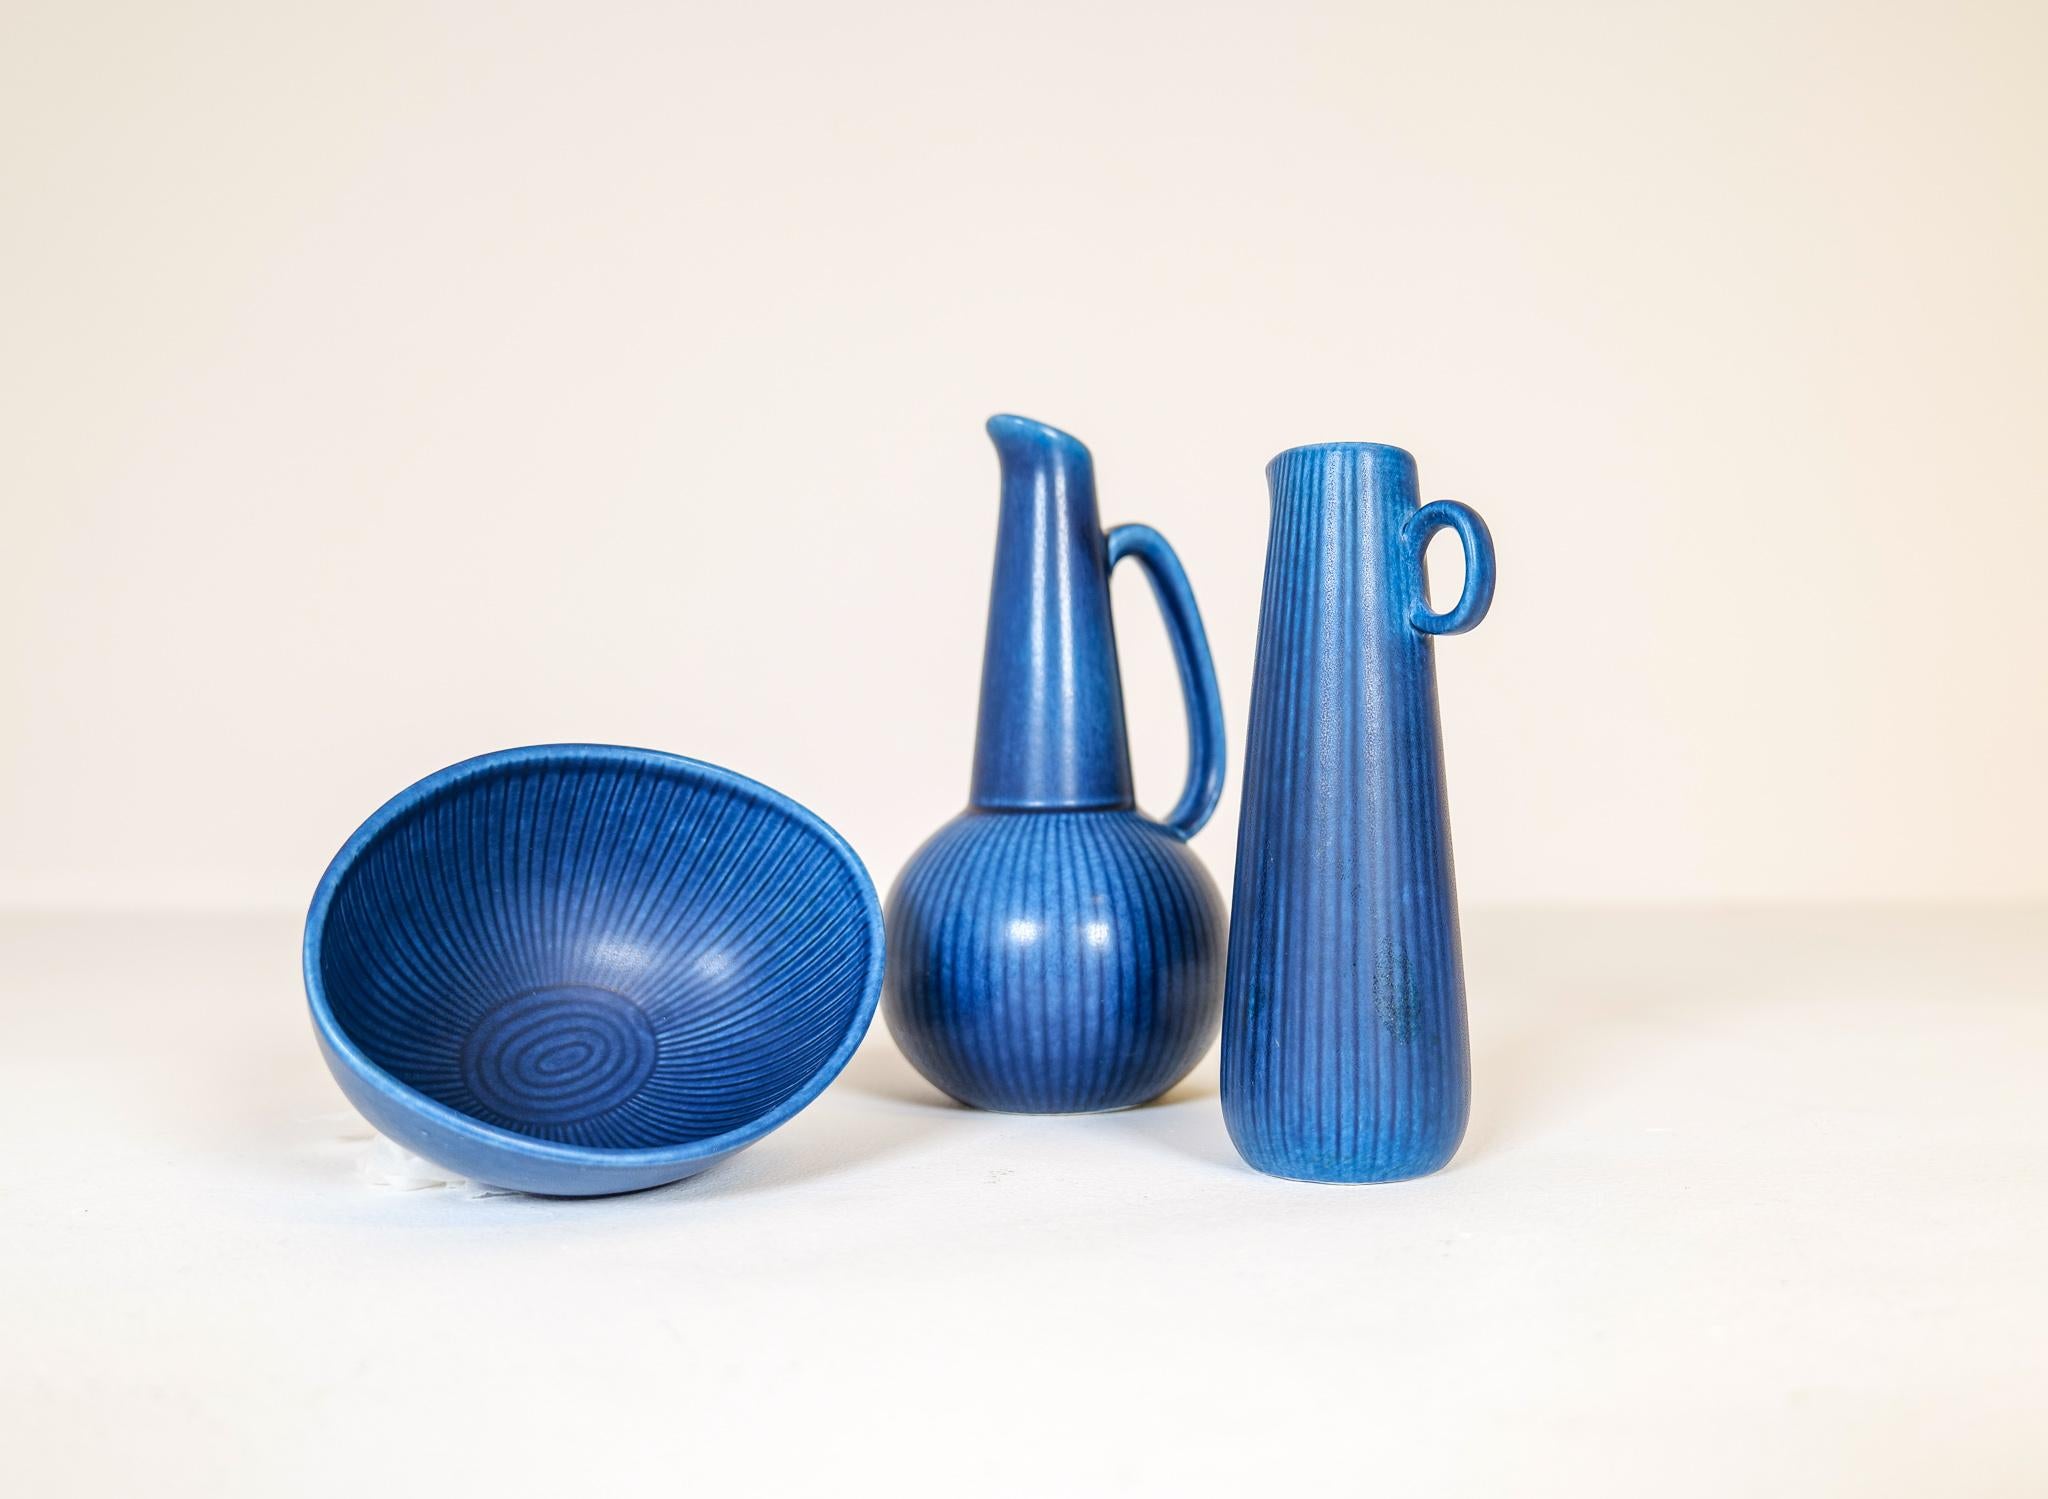 Mid-20th Century Midcentury Modern Set of 3 Rörstrand Ritzi Vases and Bowl Gunnar Nylund For Sale